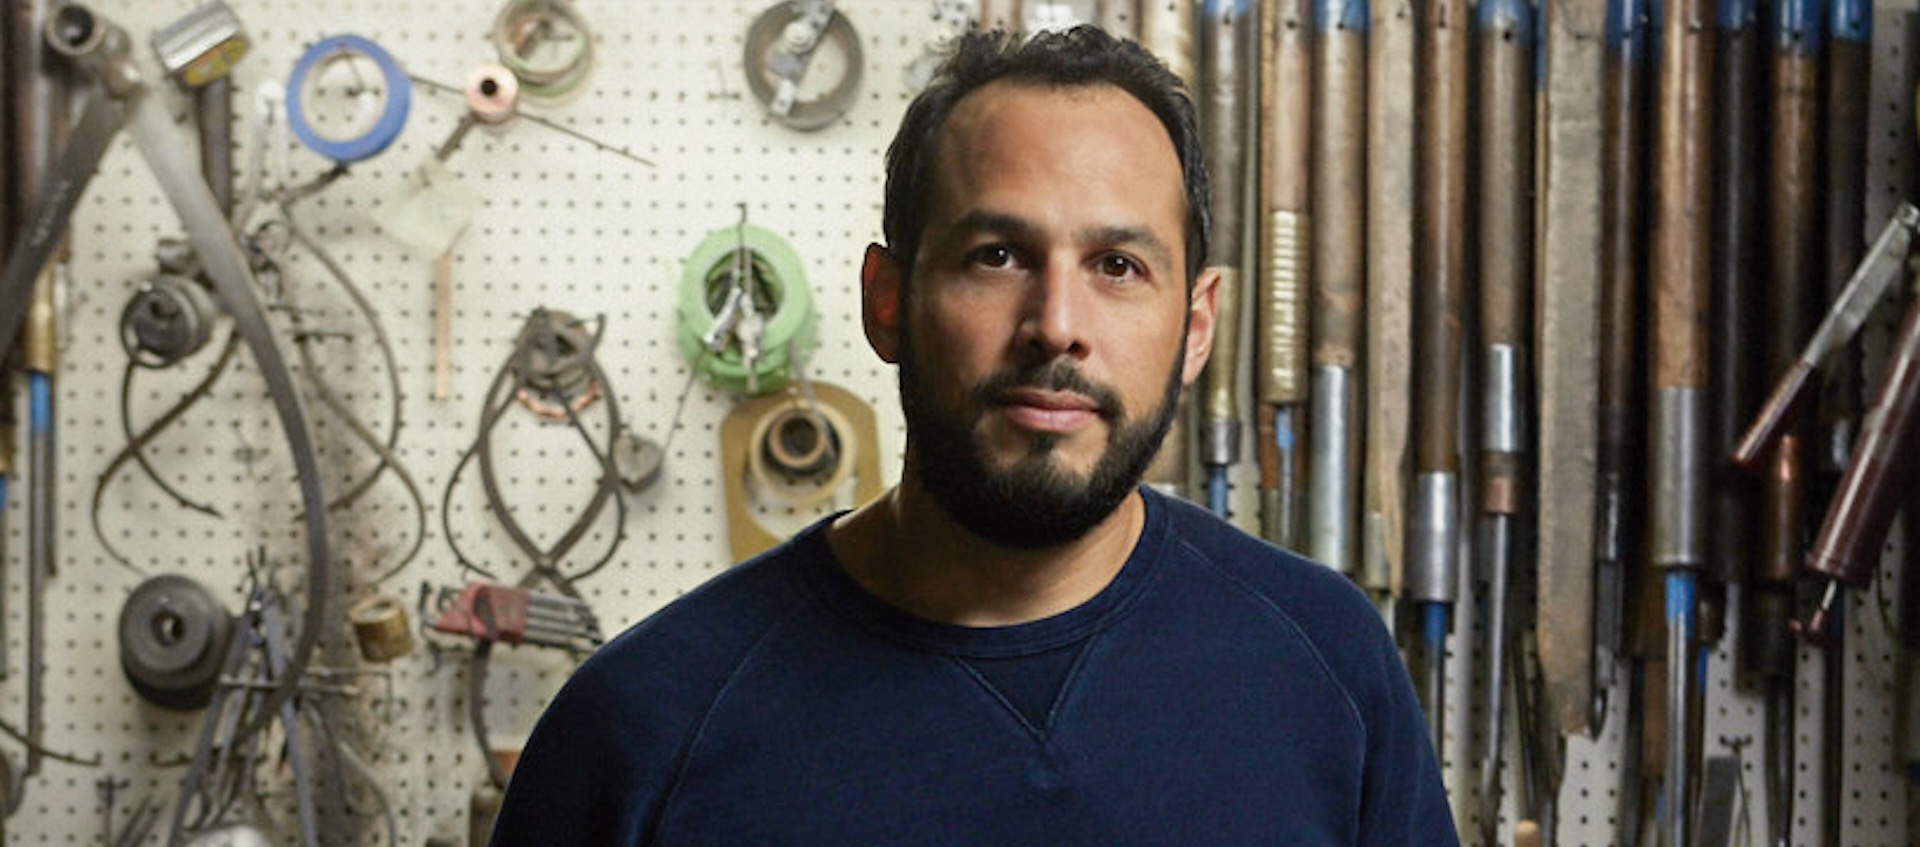 A man of Central American descent stands in his art studio and looks at the camera.